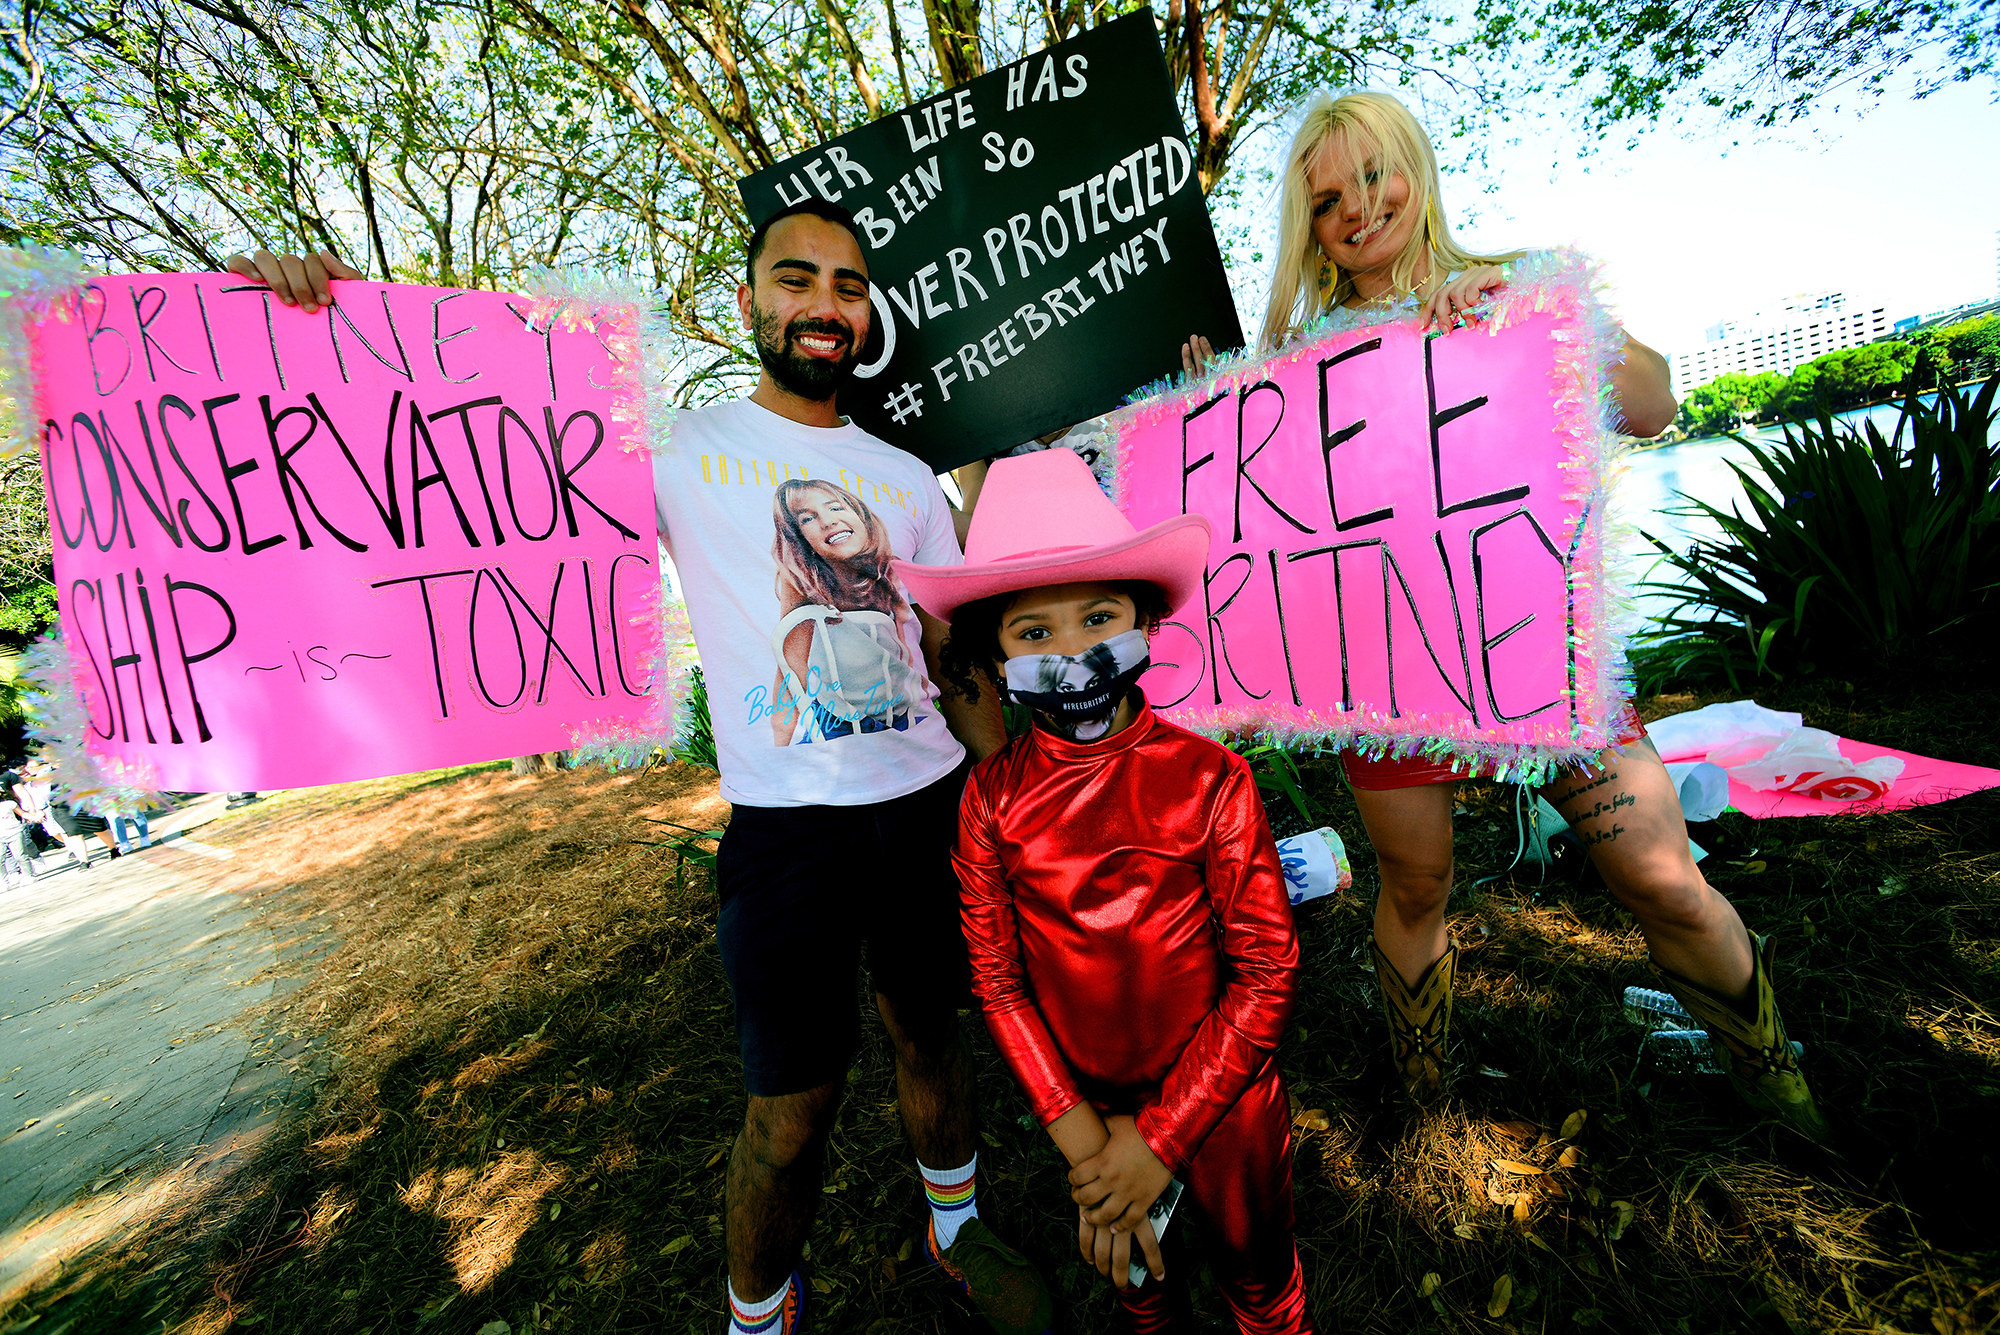 Protesters hold signs that read &quot;Britney&#x27;s conservatorship is toxic&quot; and &quot;Her life has been so overprotected&quot;